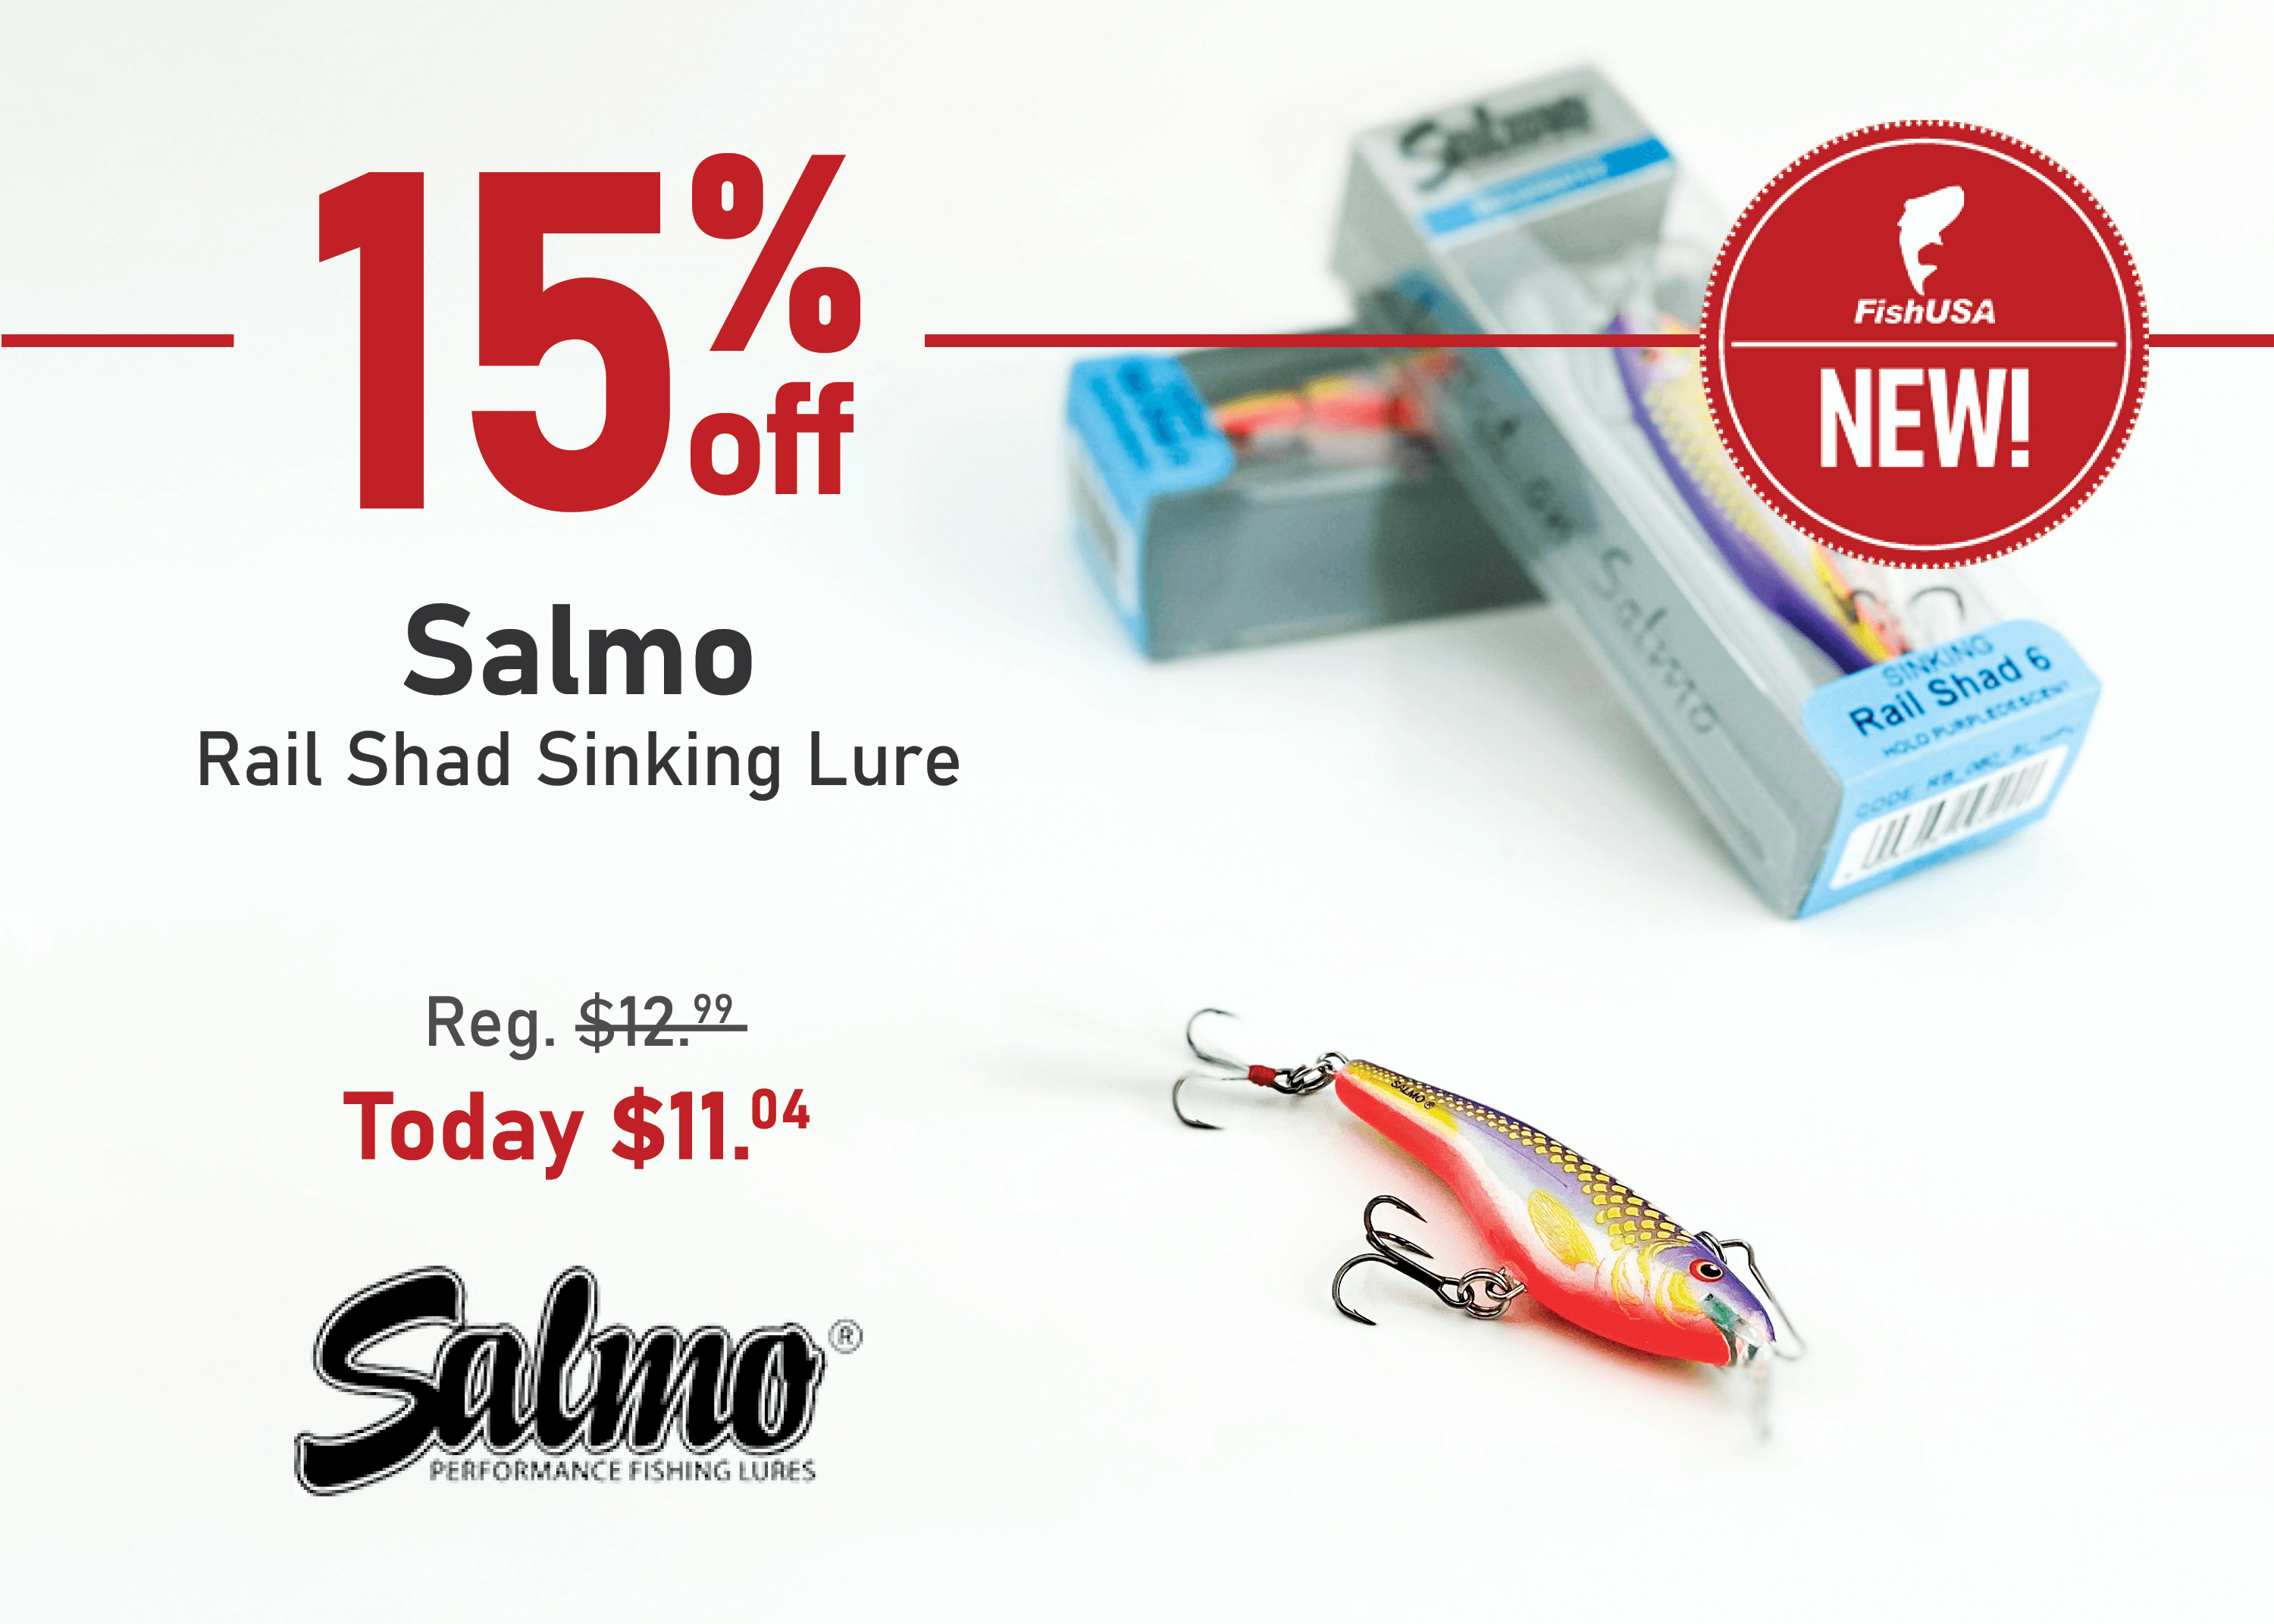 Save 15% on the Salmo Rail Shad Sinking Lure 